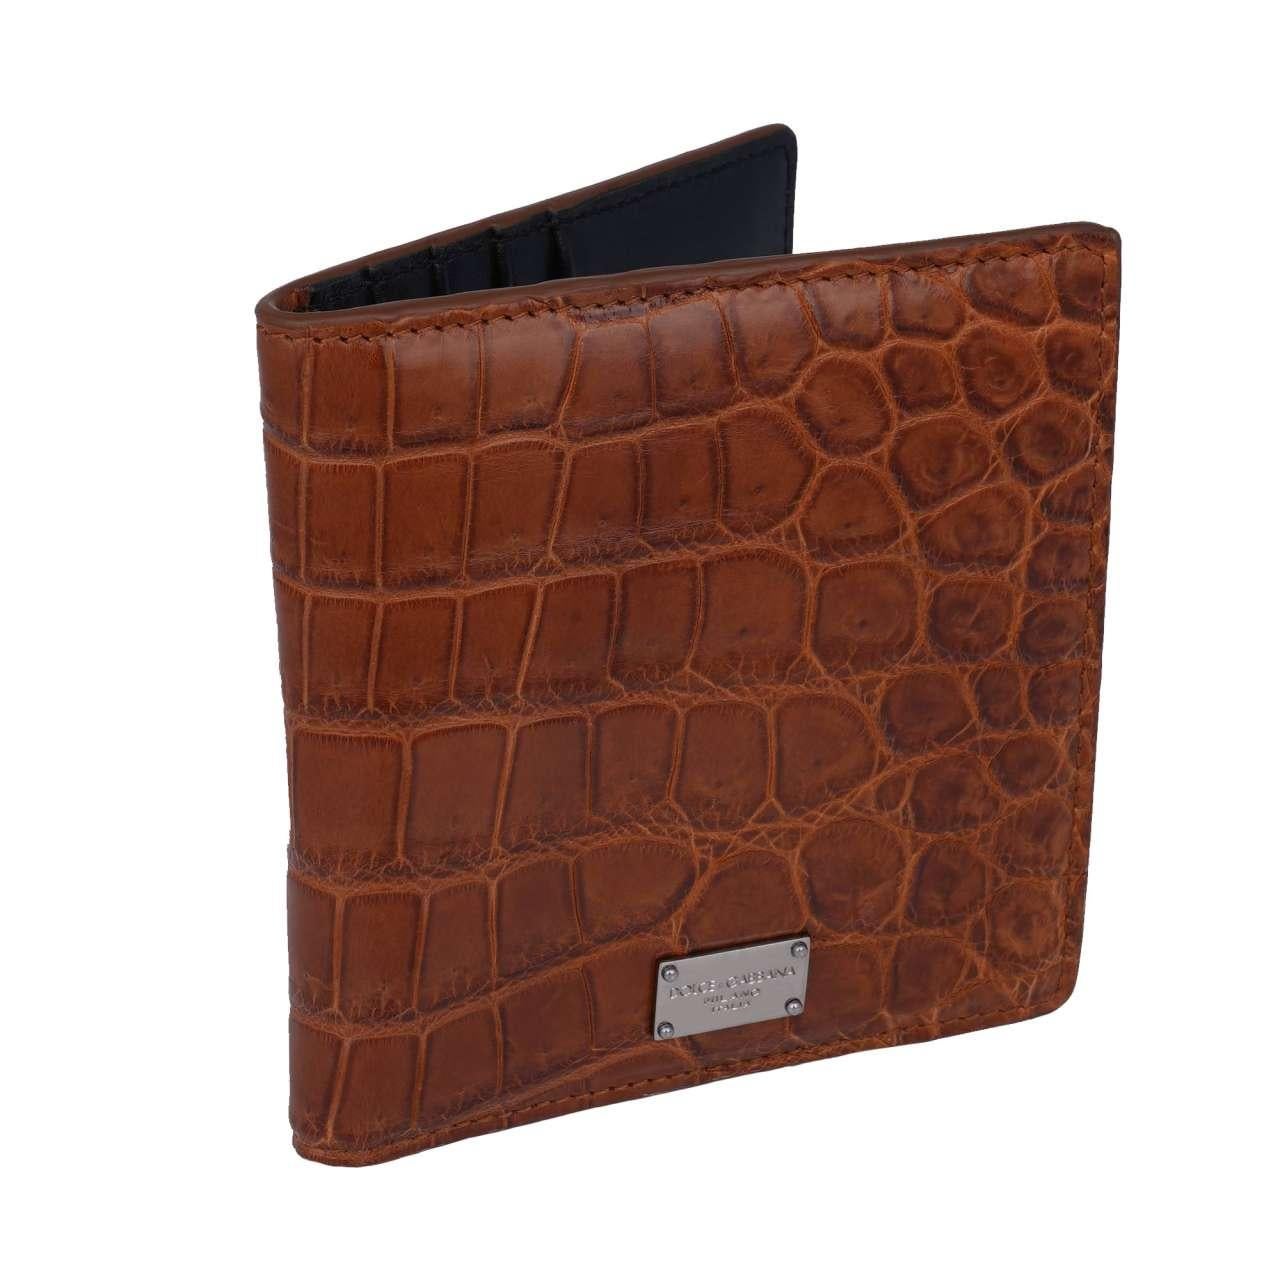 - Crocodile leather cards wallet with DG metal logo plate in brown by DOLCE & GABBANA - New with Tag - Former RRP: EUR 1,450 - MADE IN ITALY - Model: BP2458-B2DF1-00477C - Material: 100% Crocodile leather (Coccodrillo) - DG logo metal plate in front